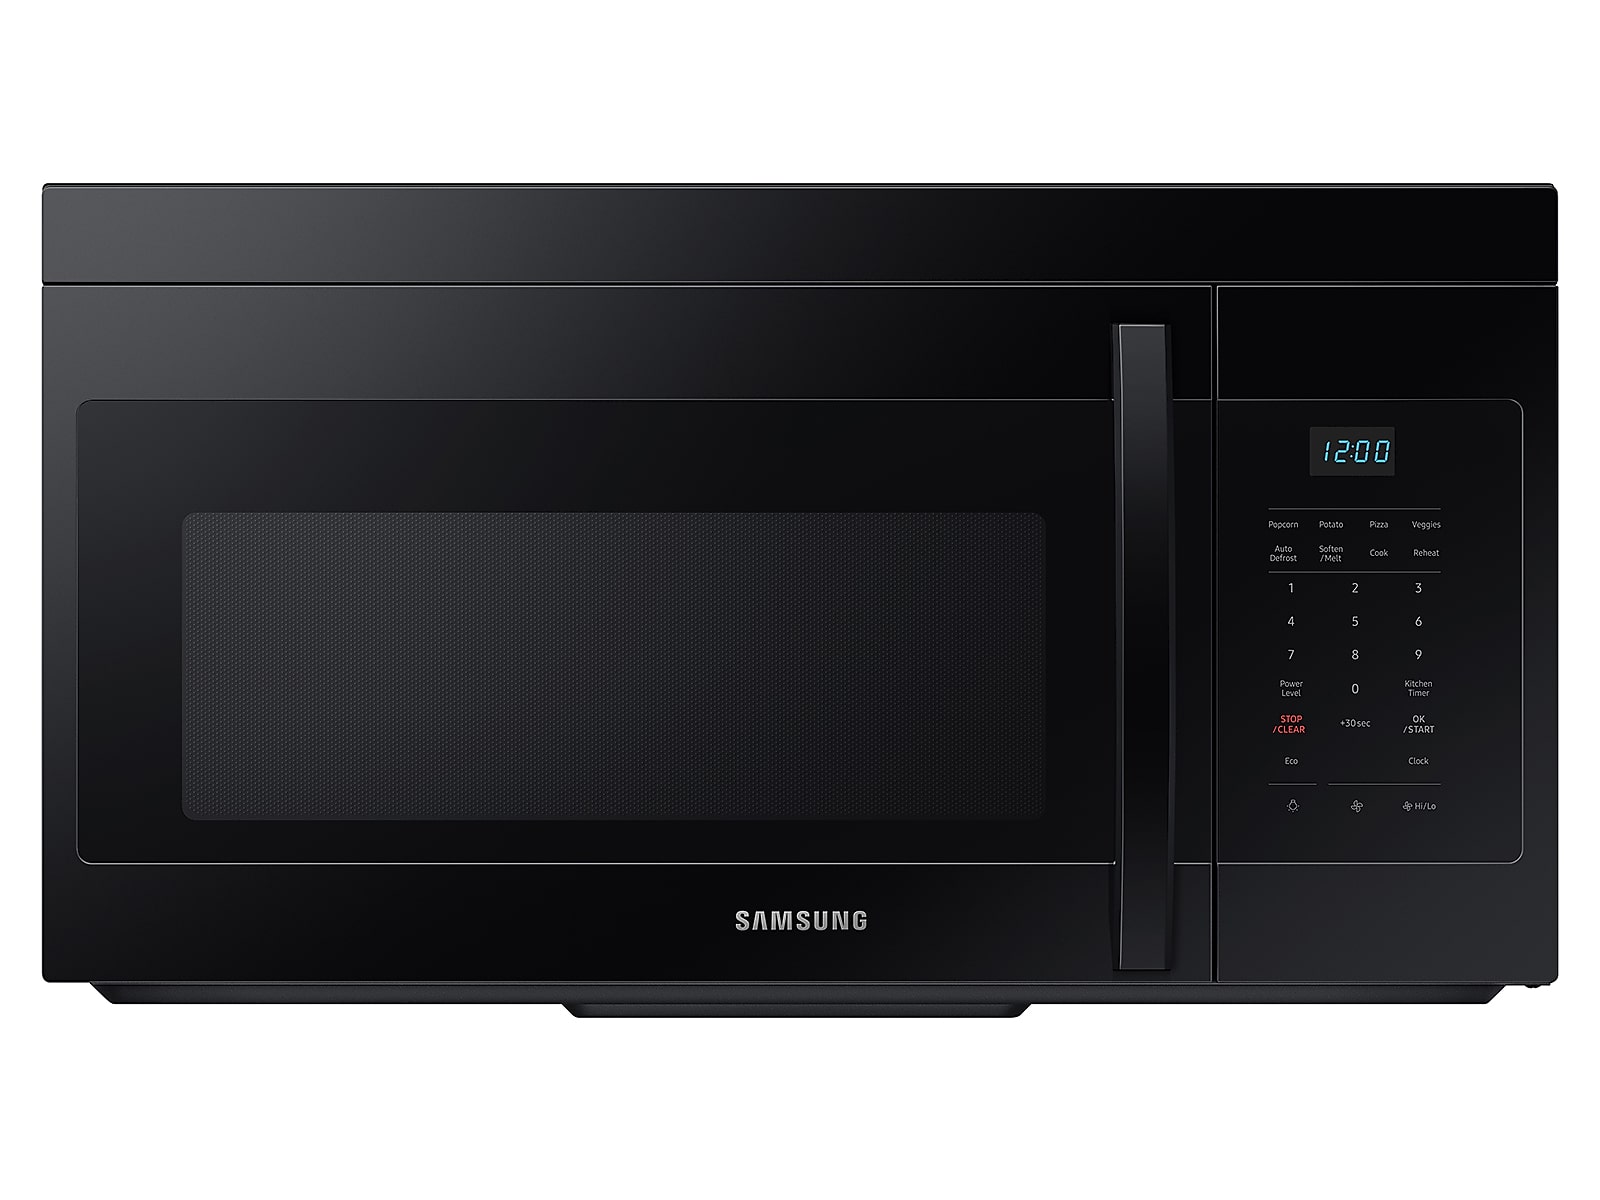 Samsung 1.6 cu. ft. Over-the-Range Microwave with Auto Cook in Black(ME16A4021AB/AA)